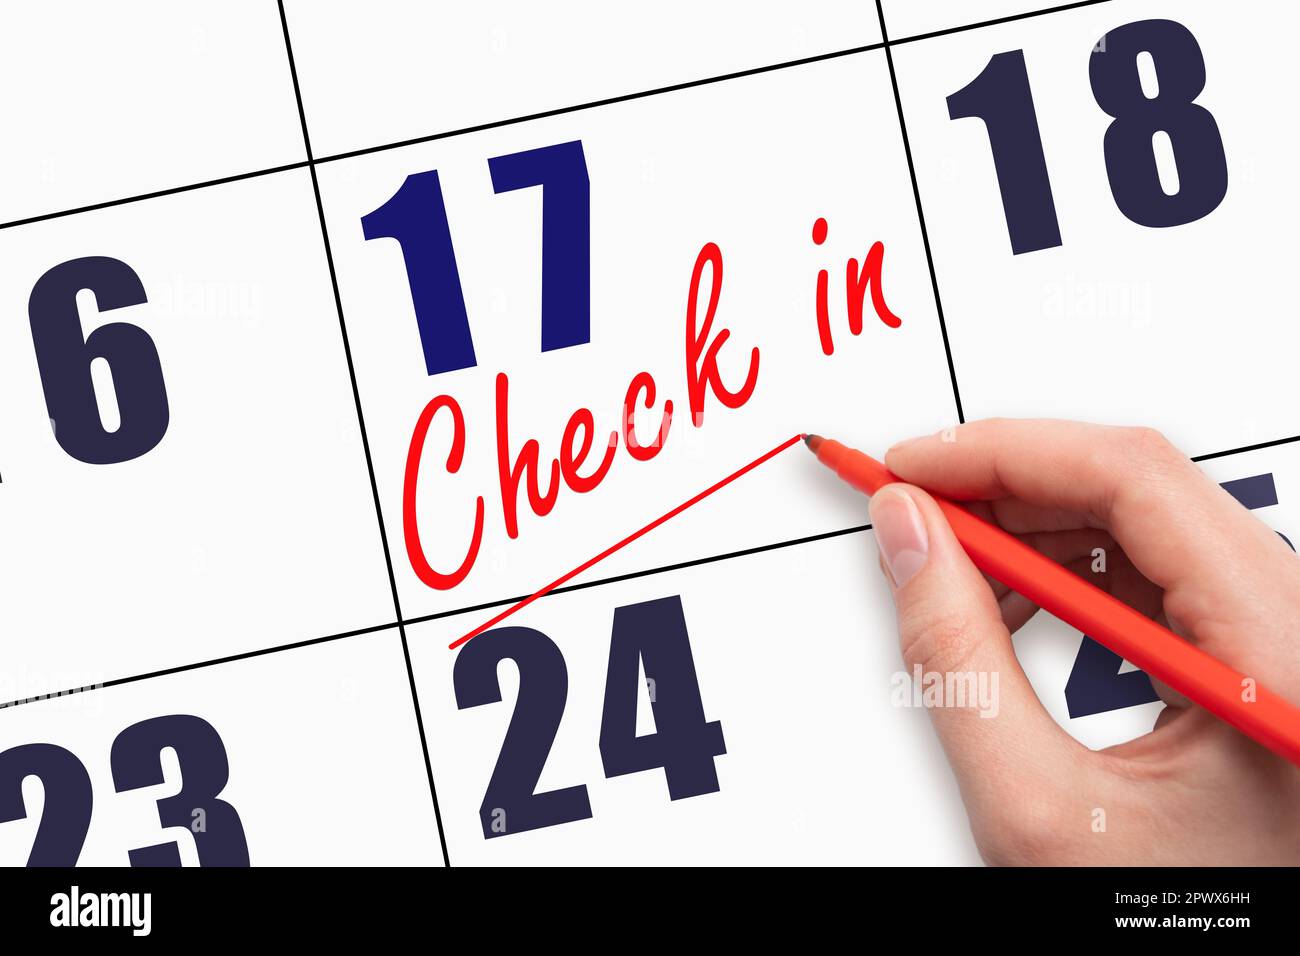 17th day of the month.  Hand writing CHECK IN and drawing a line on calendar date. Business.  Day of the year concept. Stock Photo